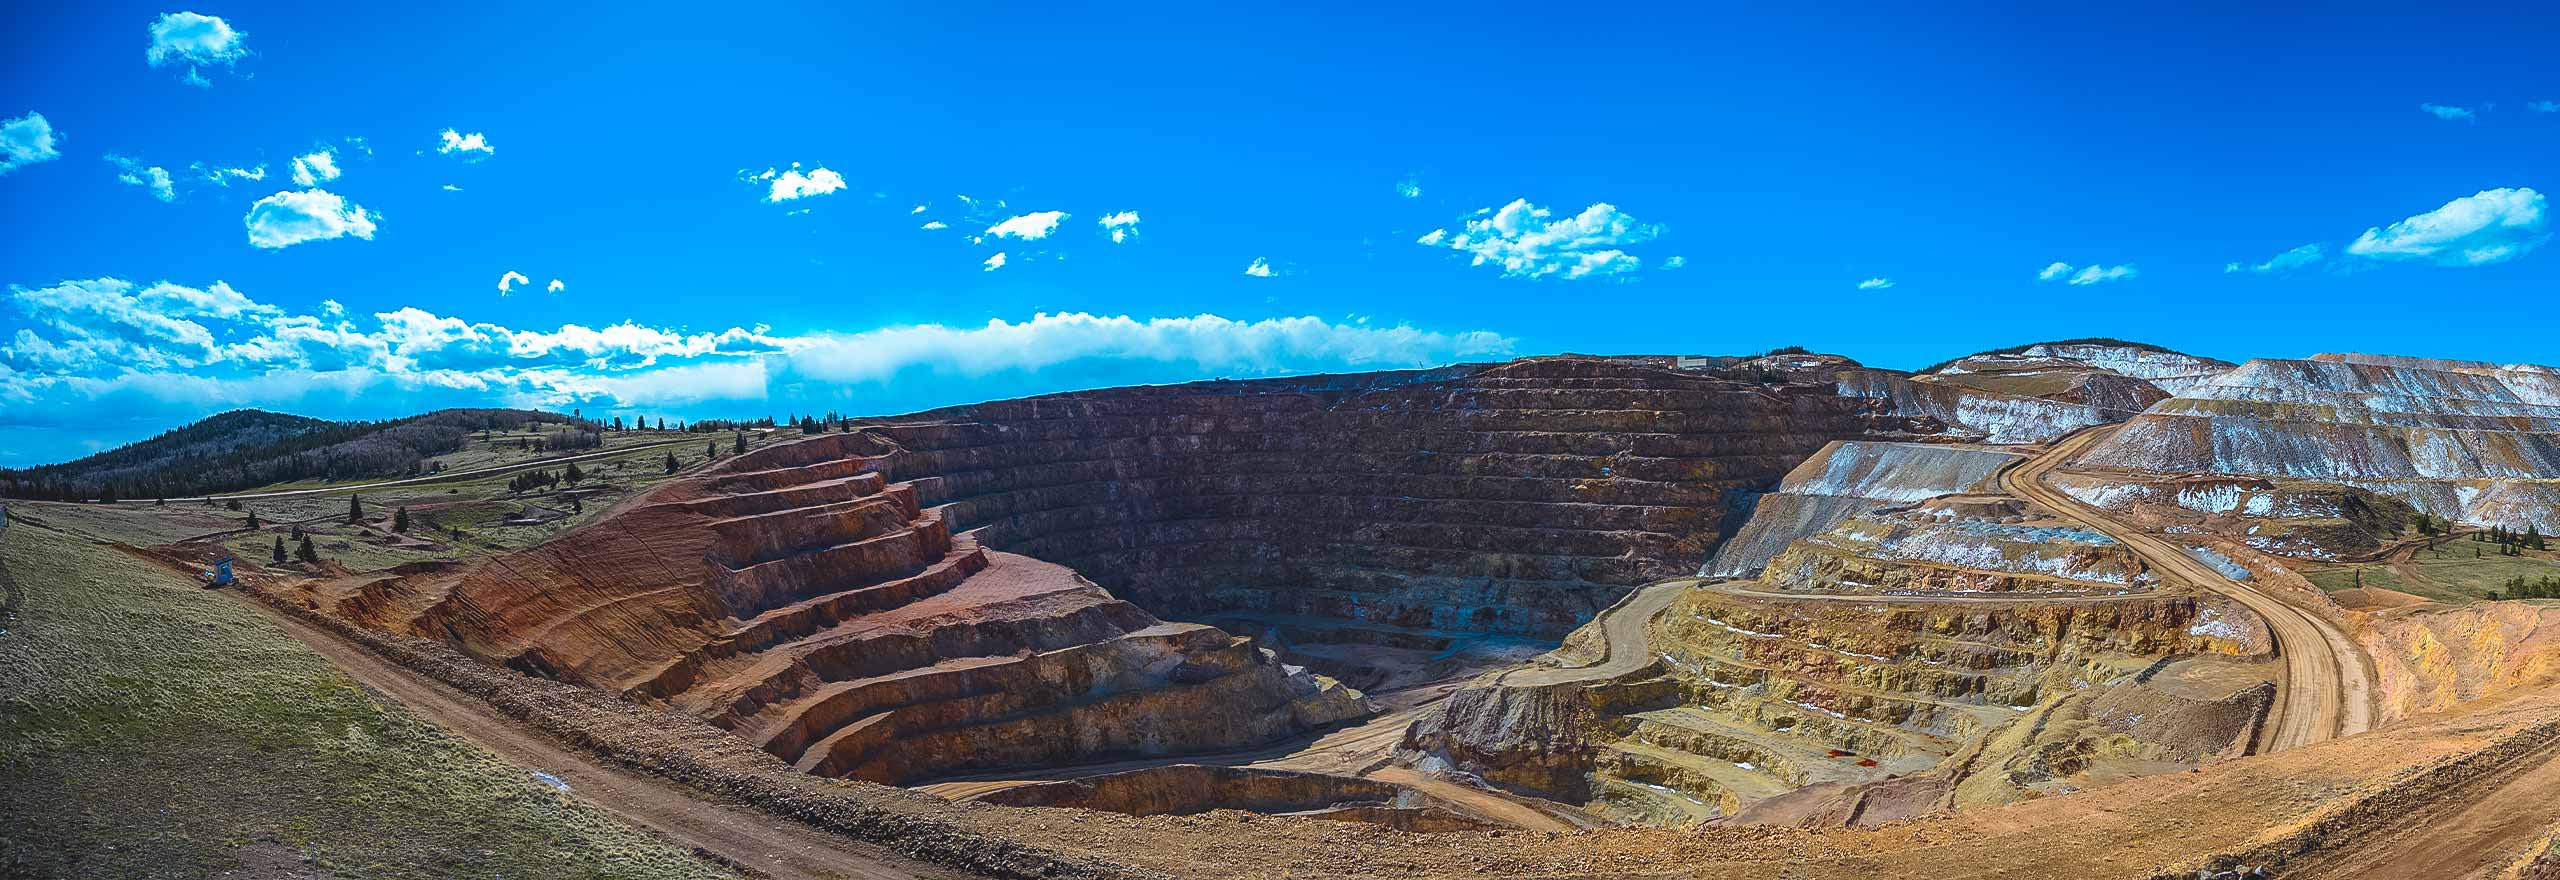 wide view of open pit mine